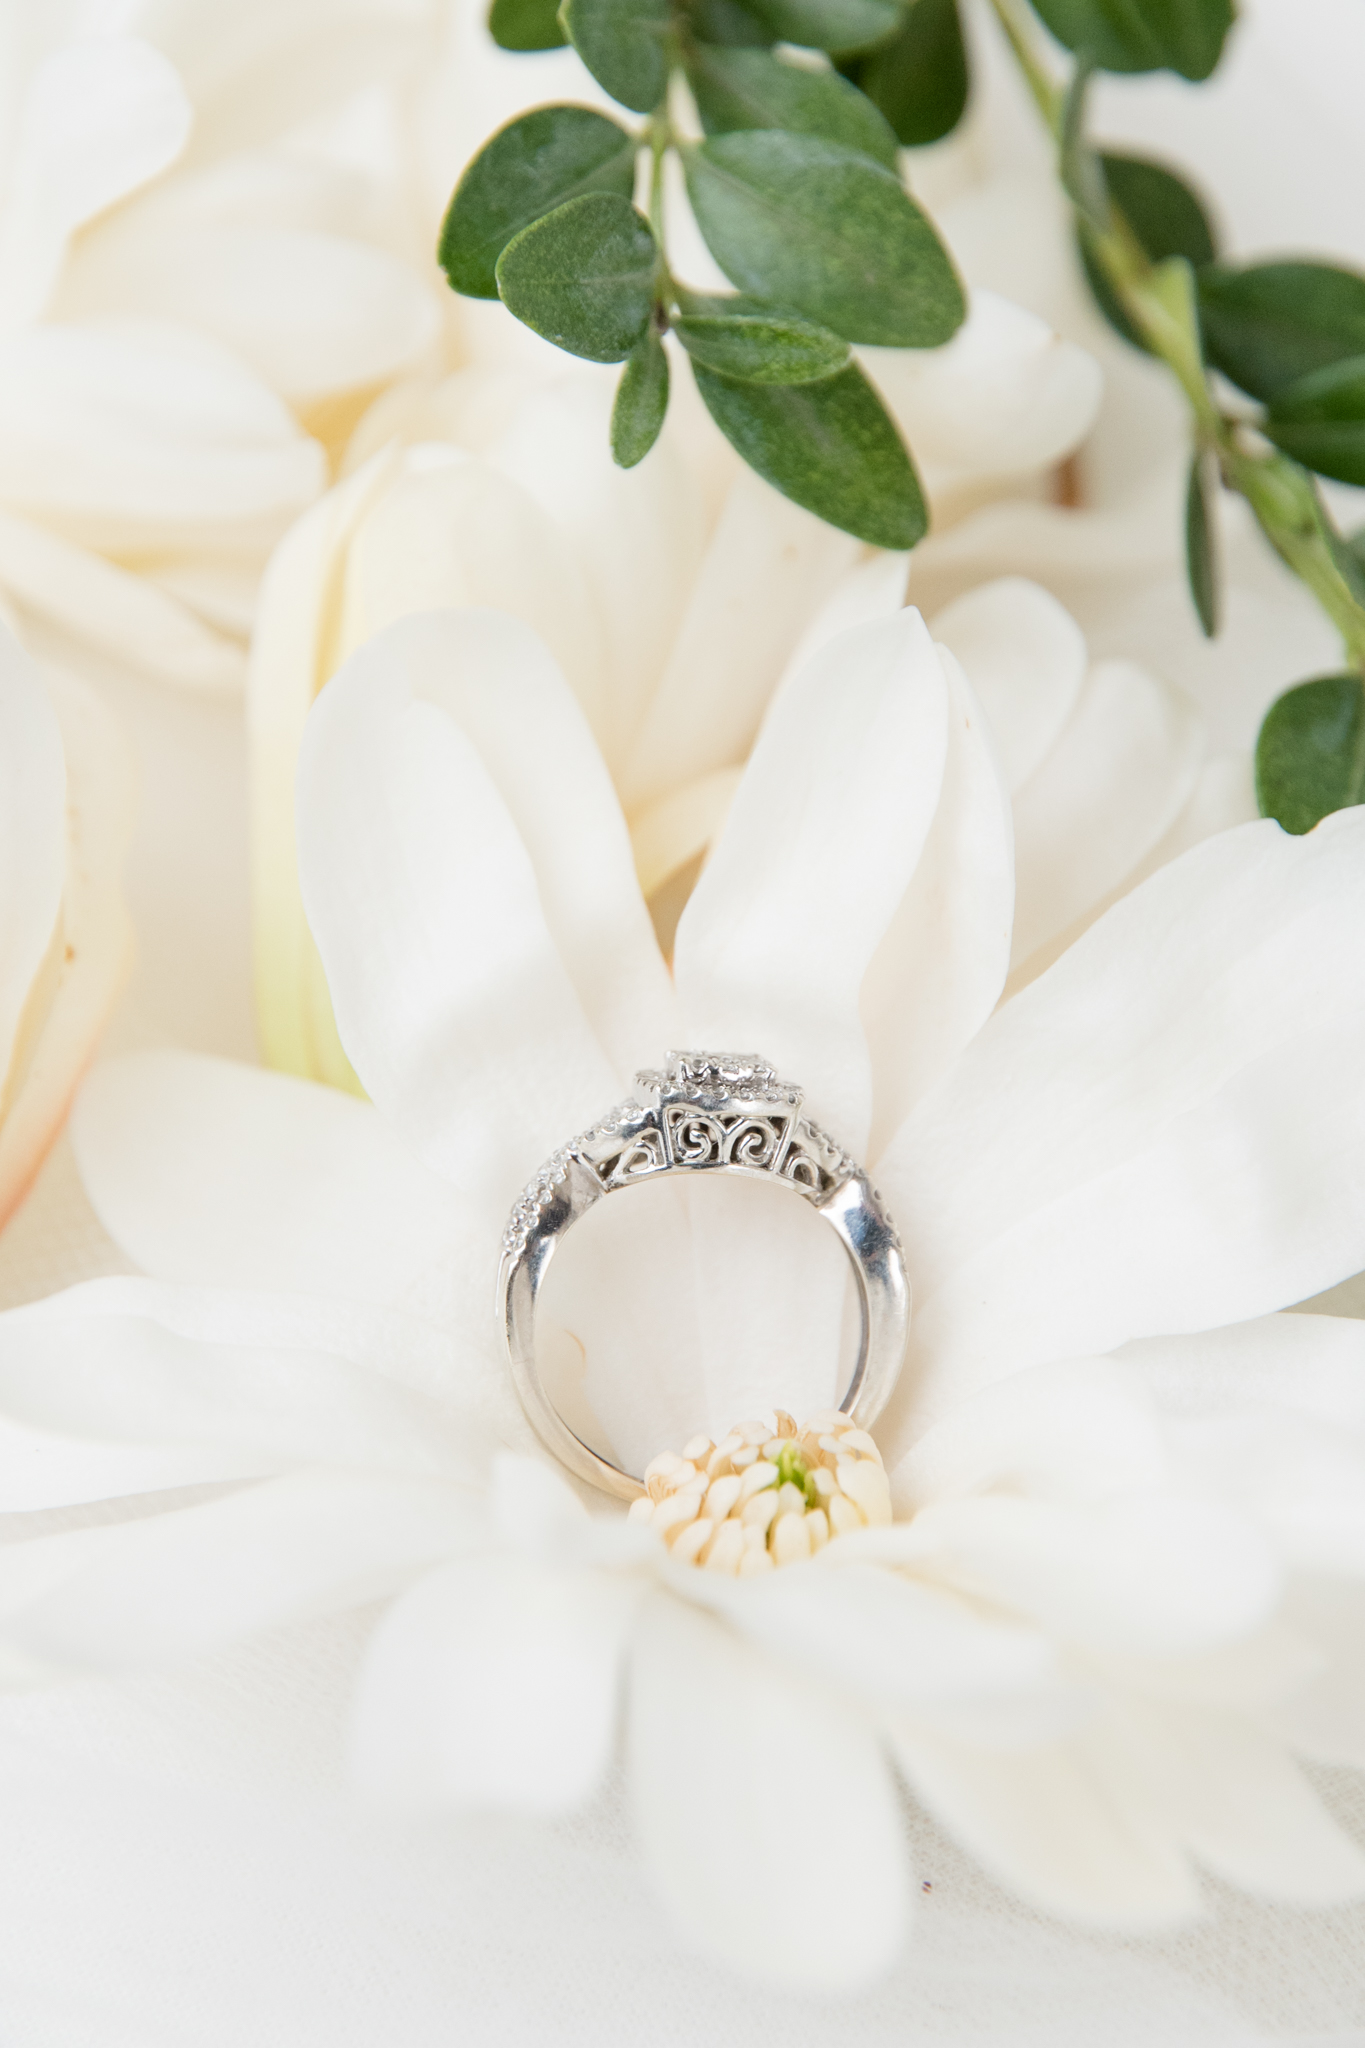 Engagement ring sits in flower